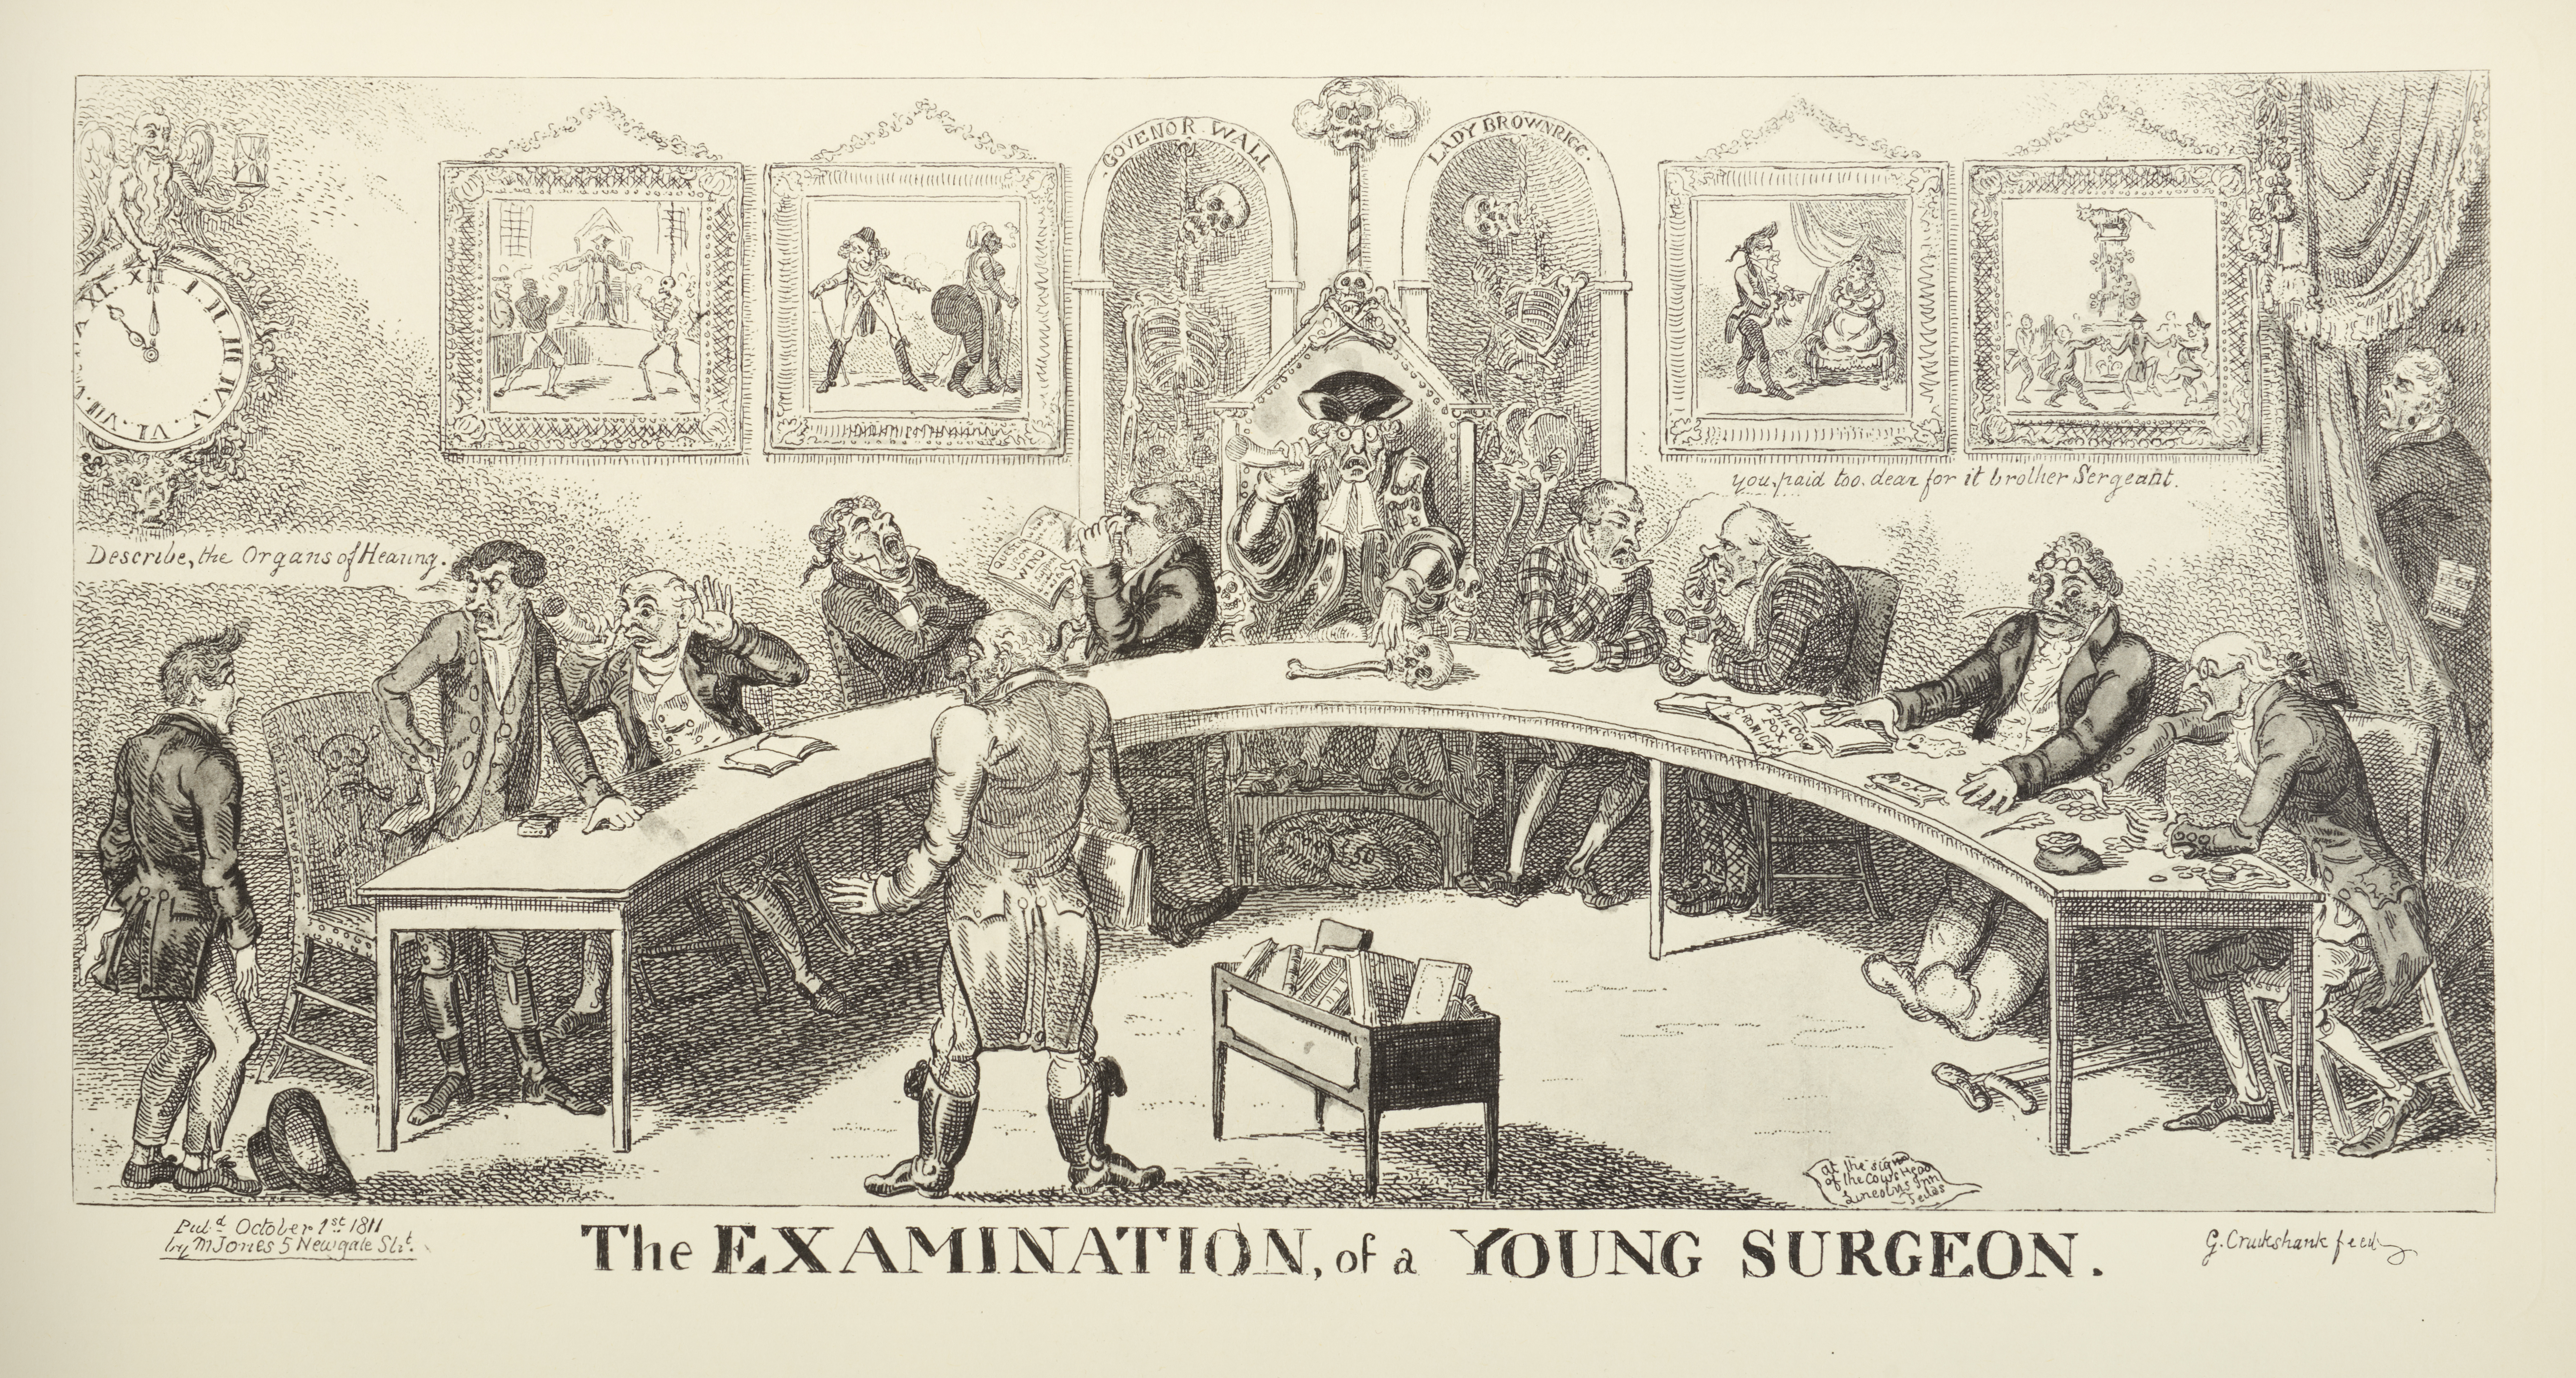 A young surgeon is interviewed by a panel sat around a curved table.